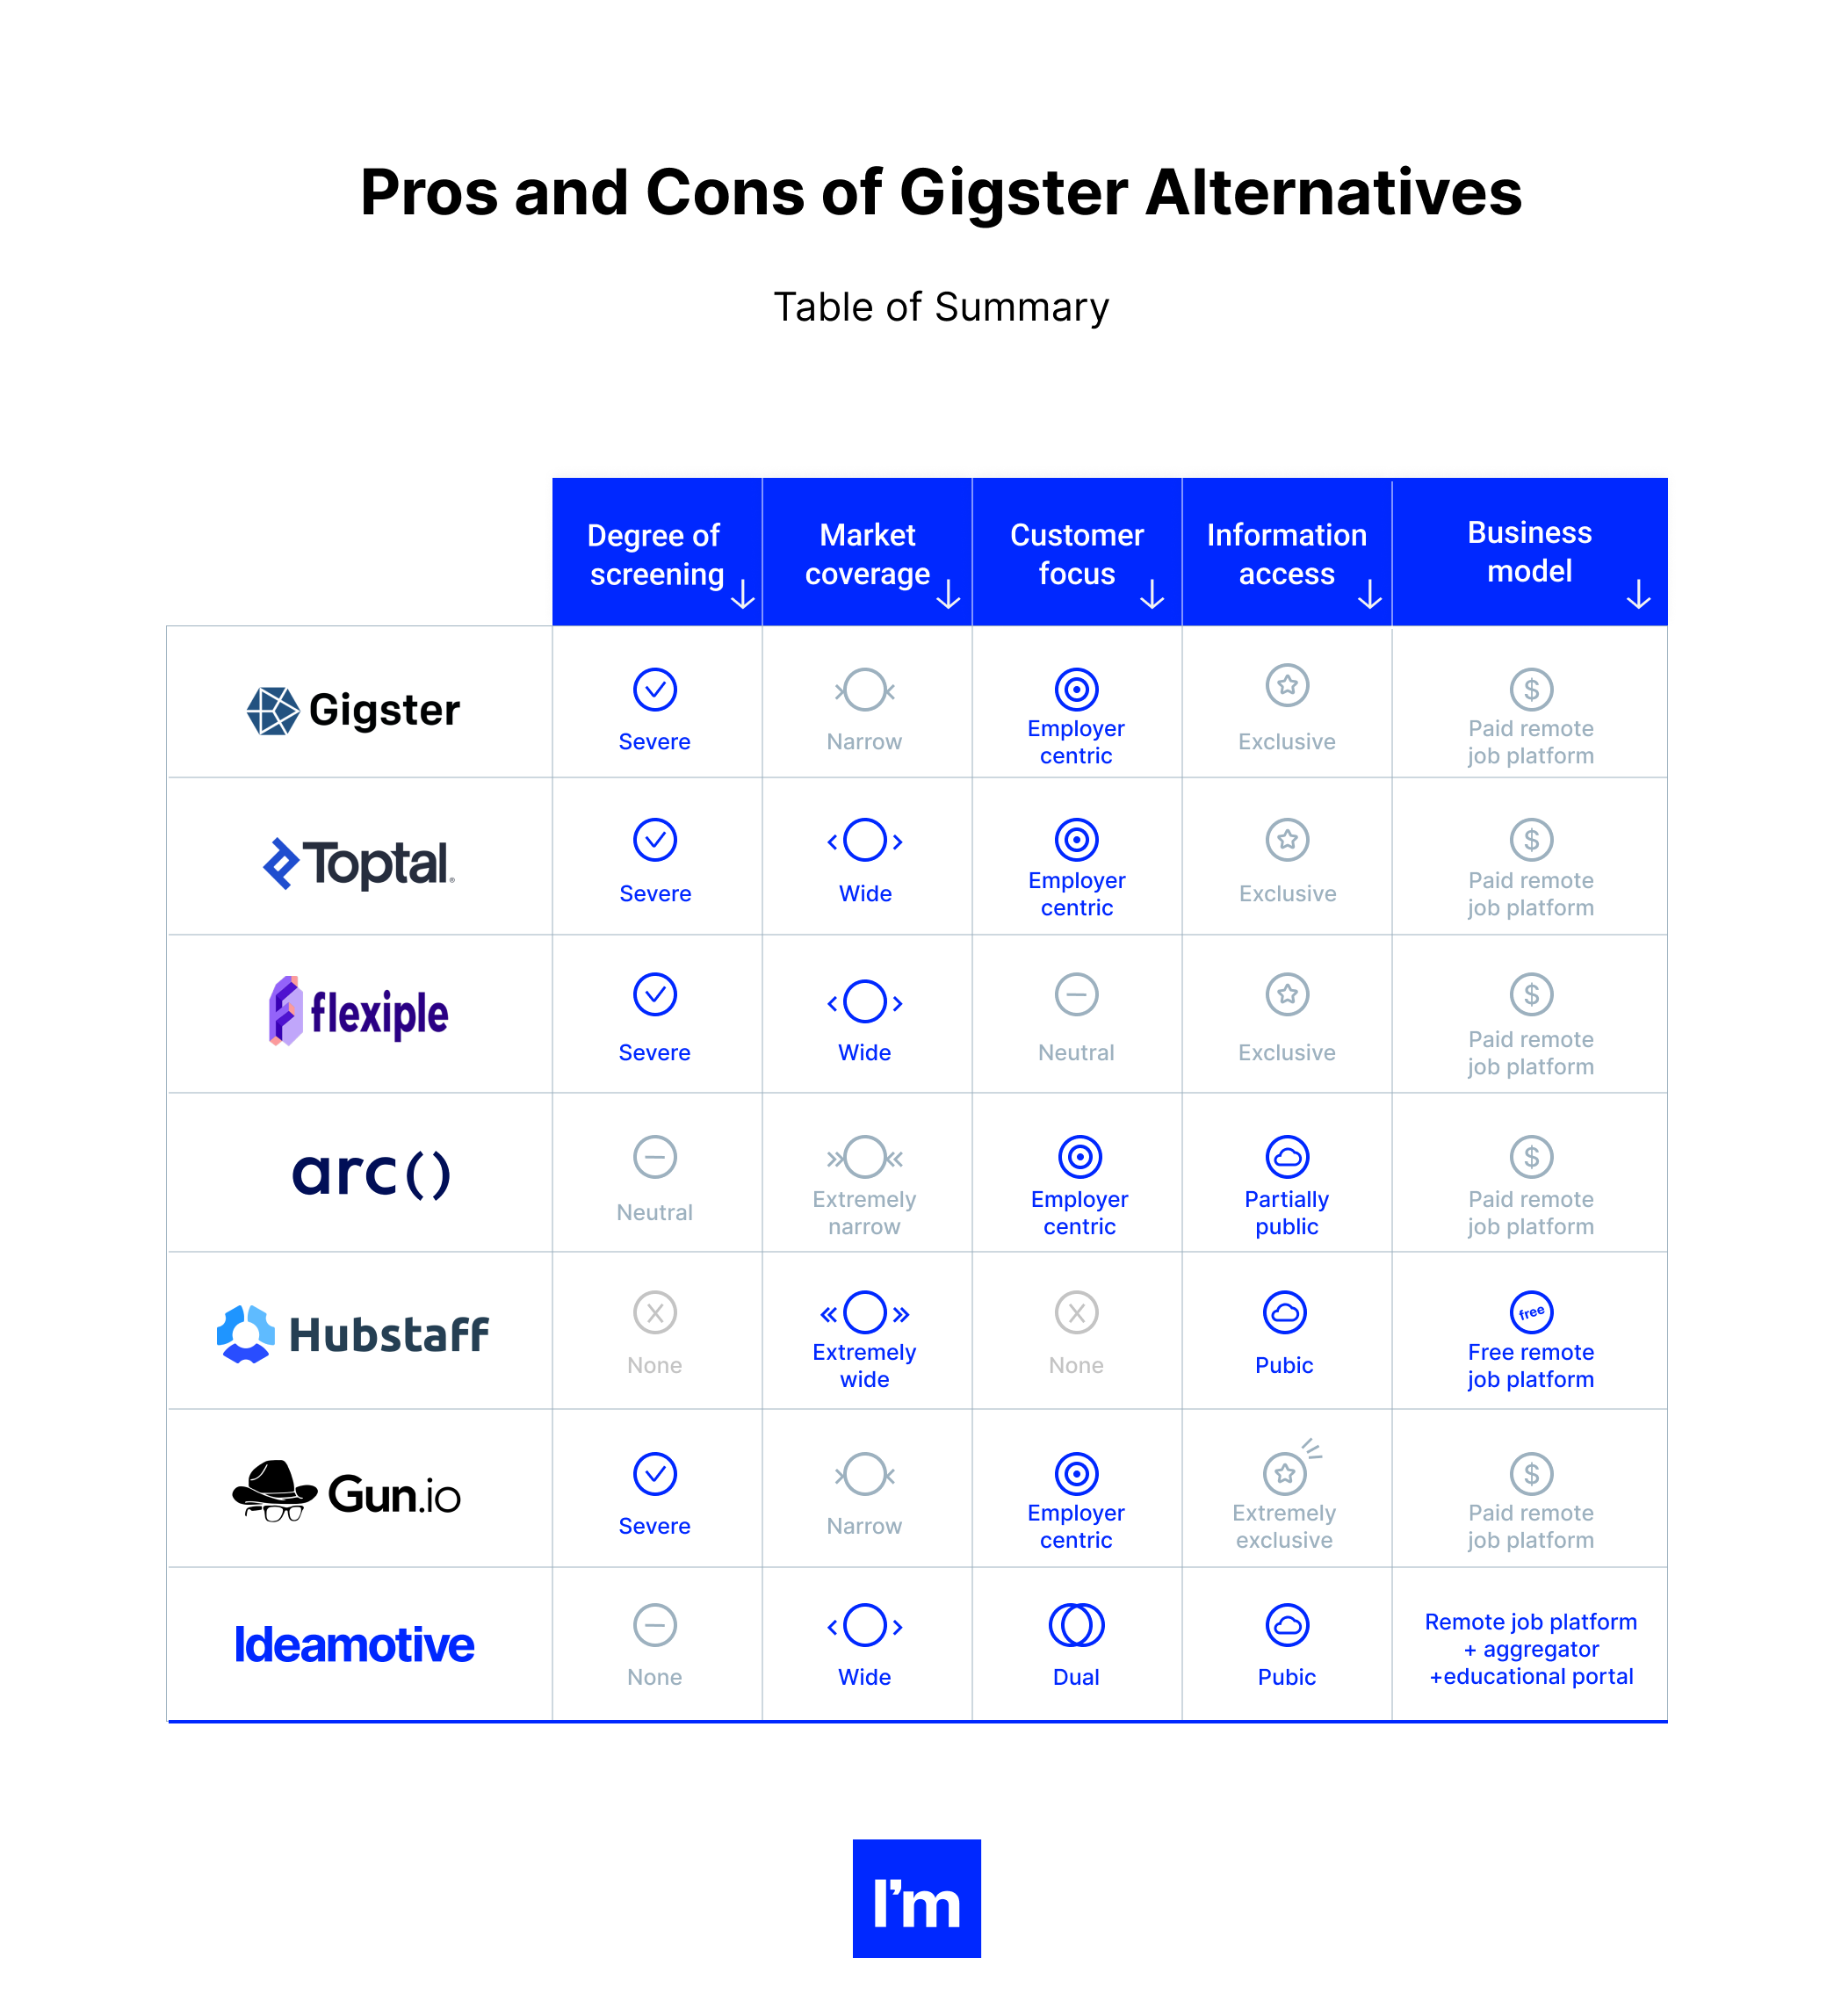 Pros and Cons of Gigster Alternatives